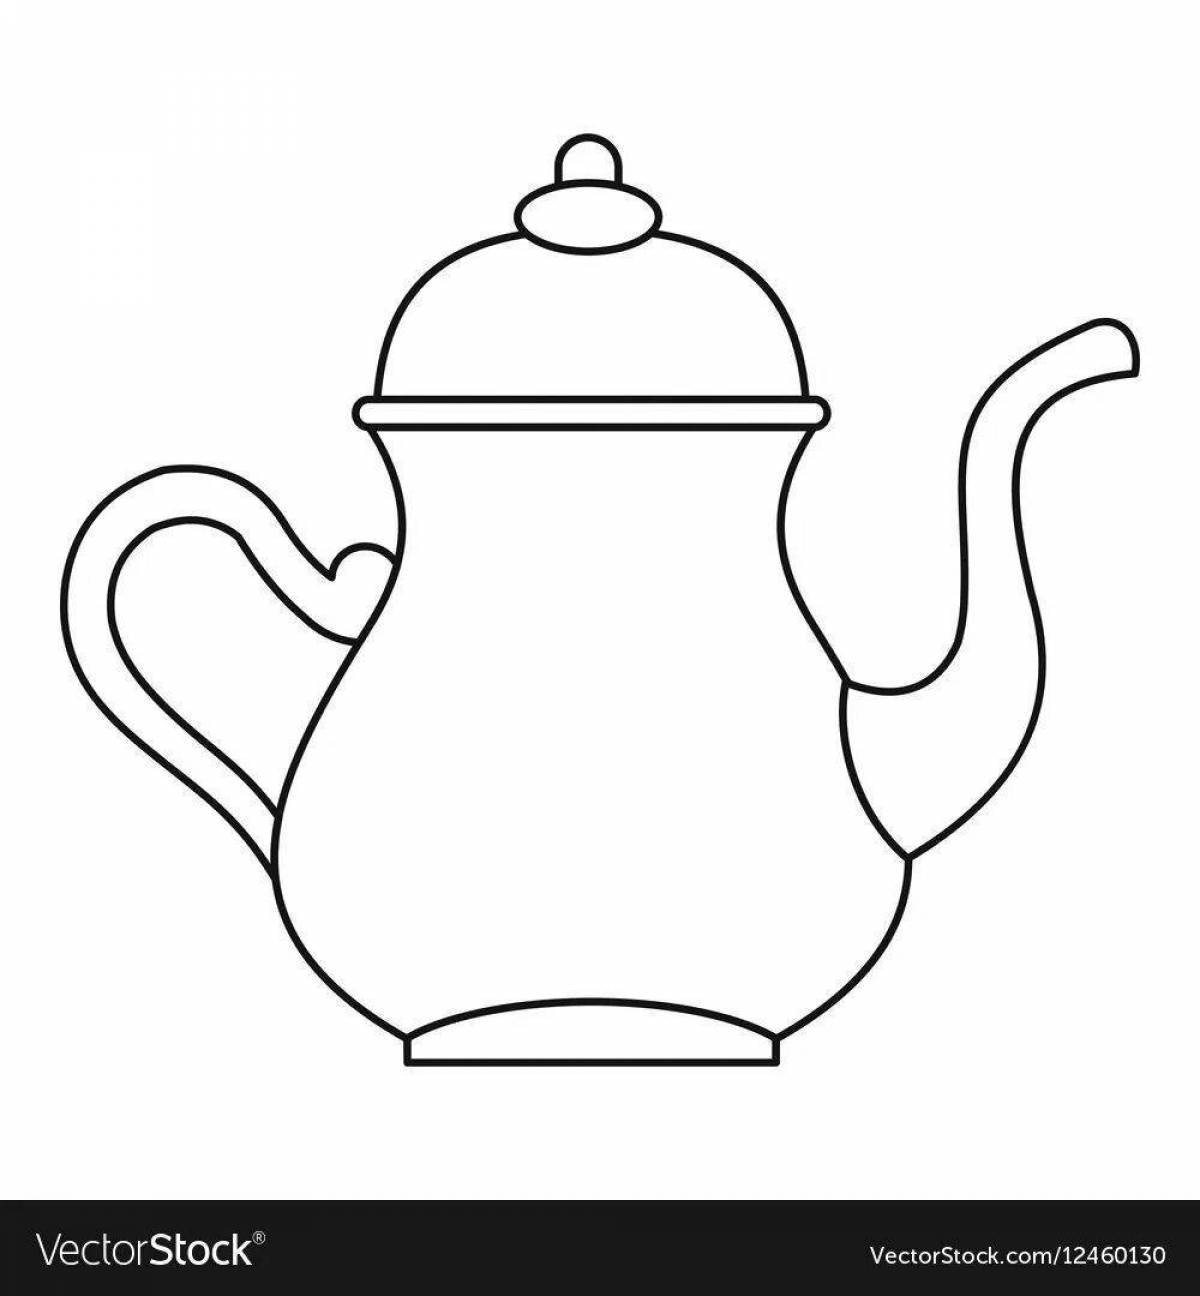 Adorable teapot coloring for kids